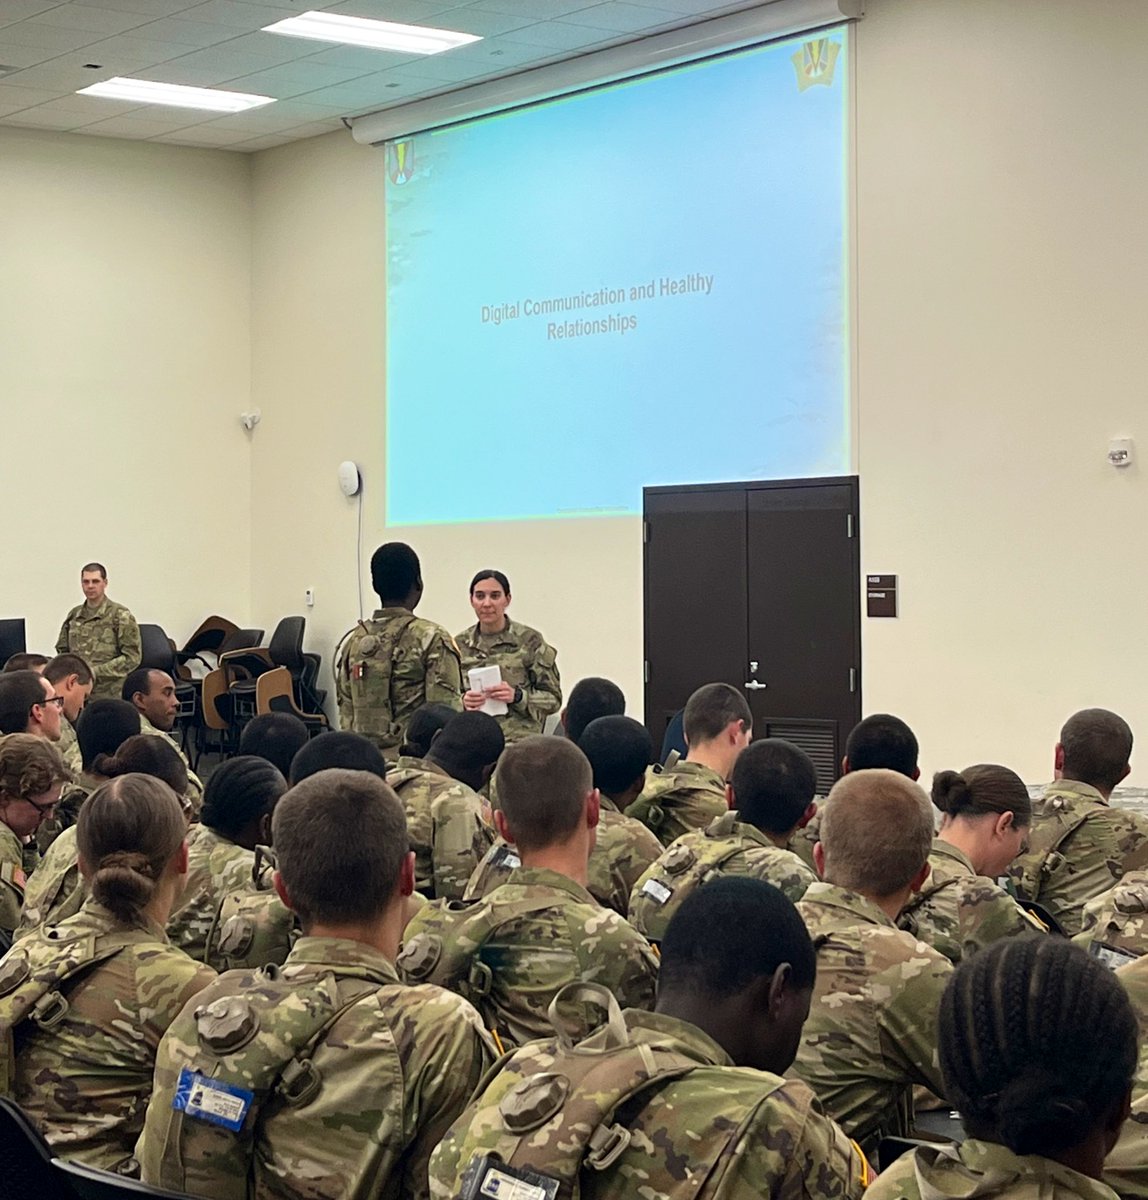 Soldiers in week 9 of BCT discuss healthy texting habits. Communication in all things is key and essential for mission success. #VictoryStartsHere #WeMakeAmericanSoldiers